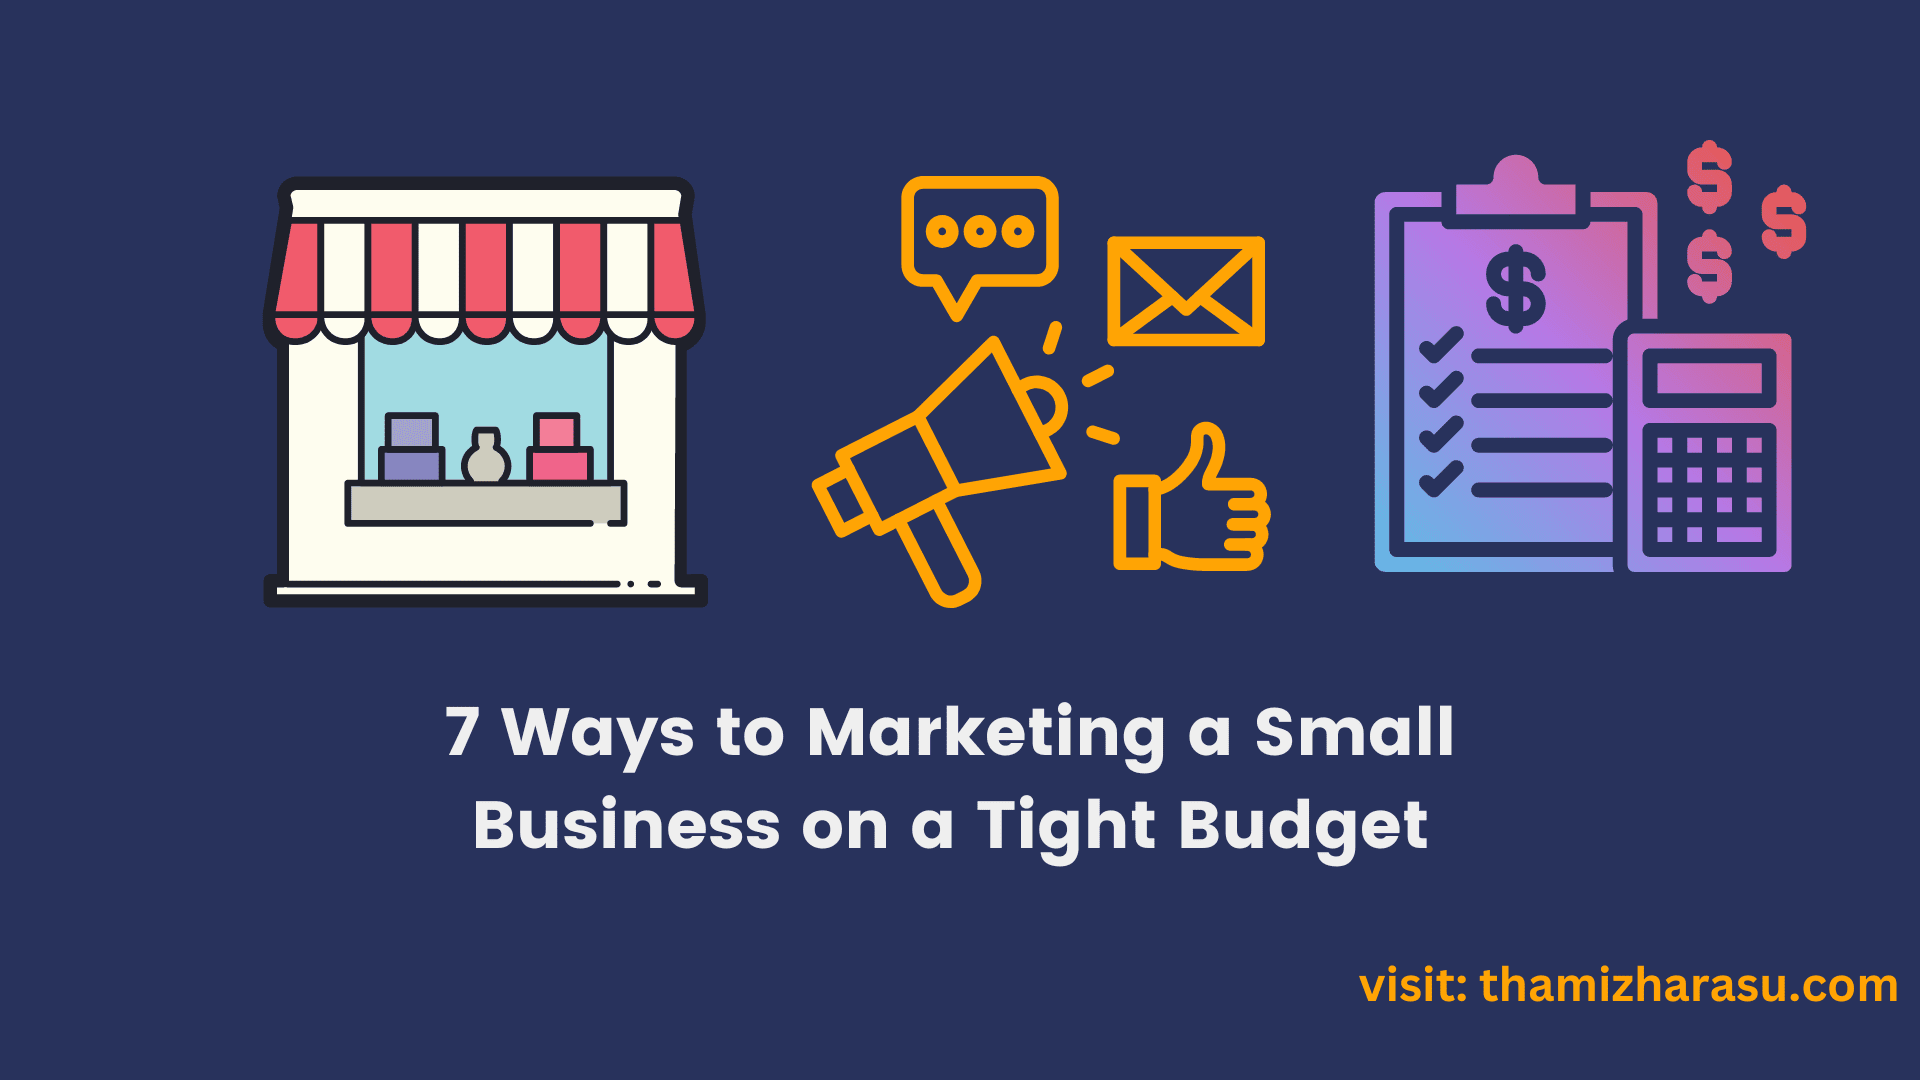 7 Ways to Marketing a Small Business on a Tight Budget